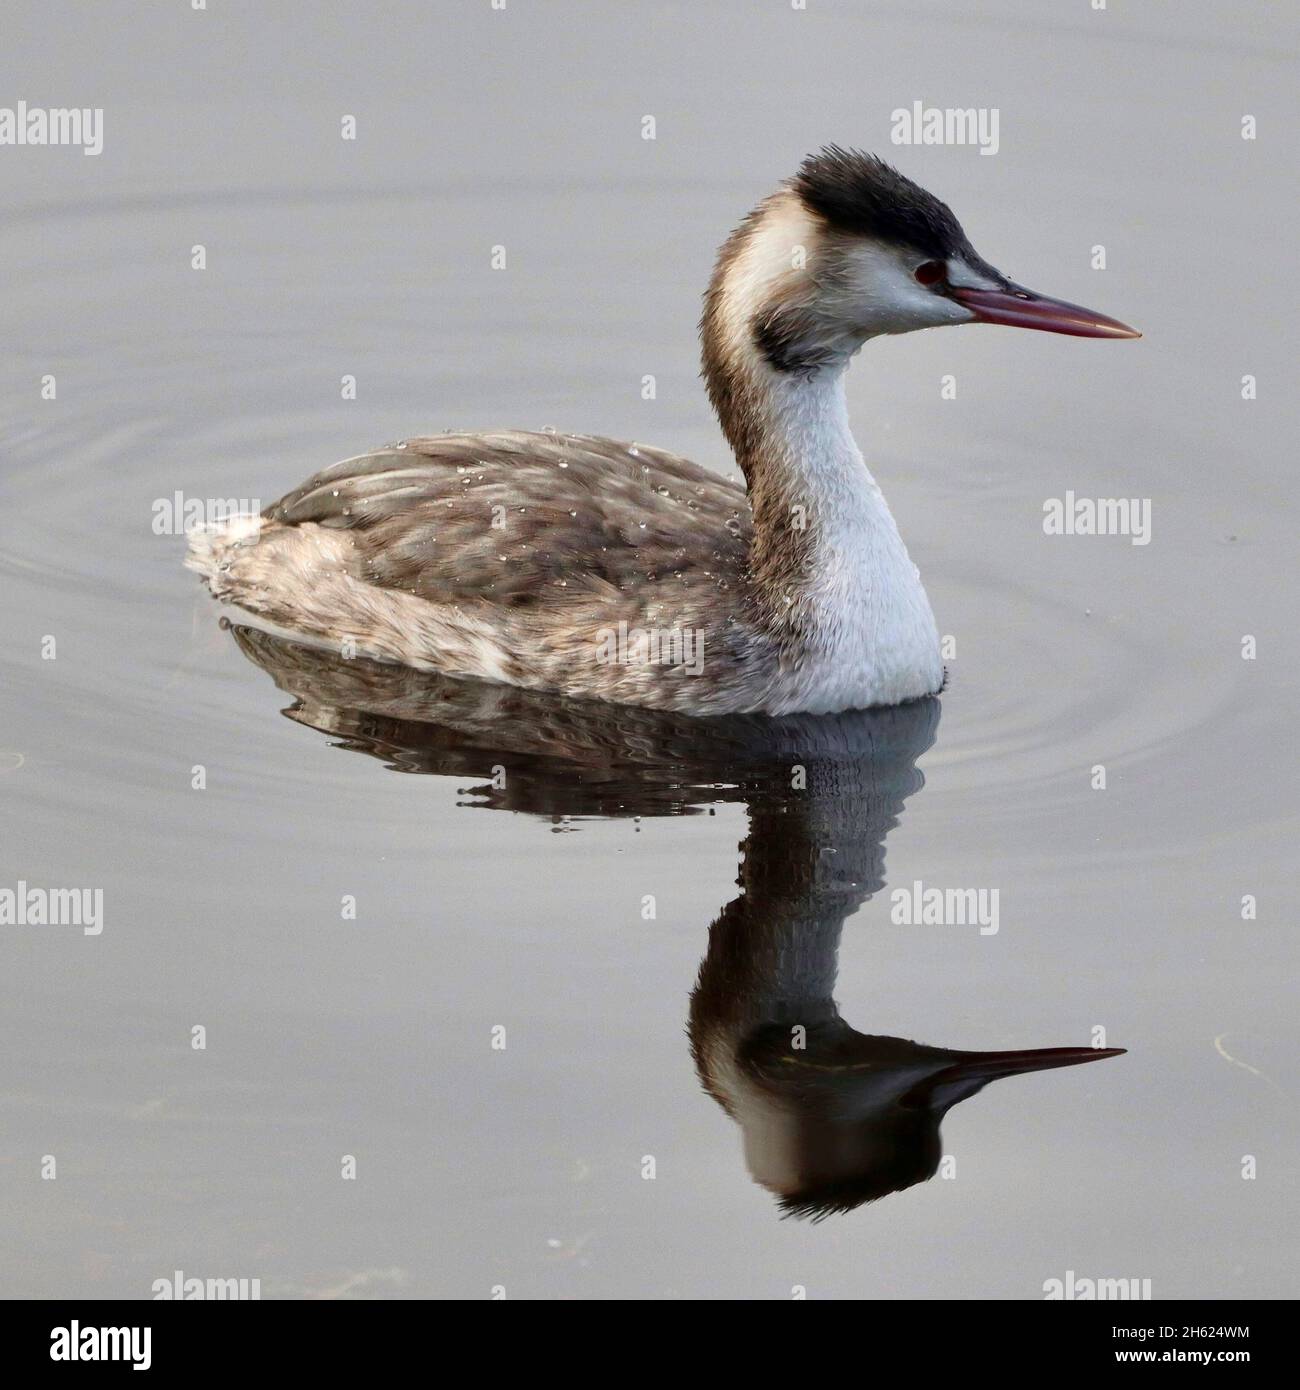 Reflection of a Great Crested Grebe at Hollingworth Lake Stock Photo